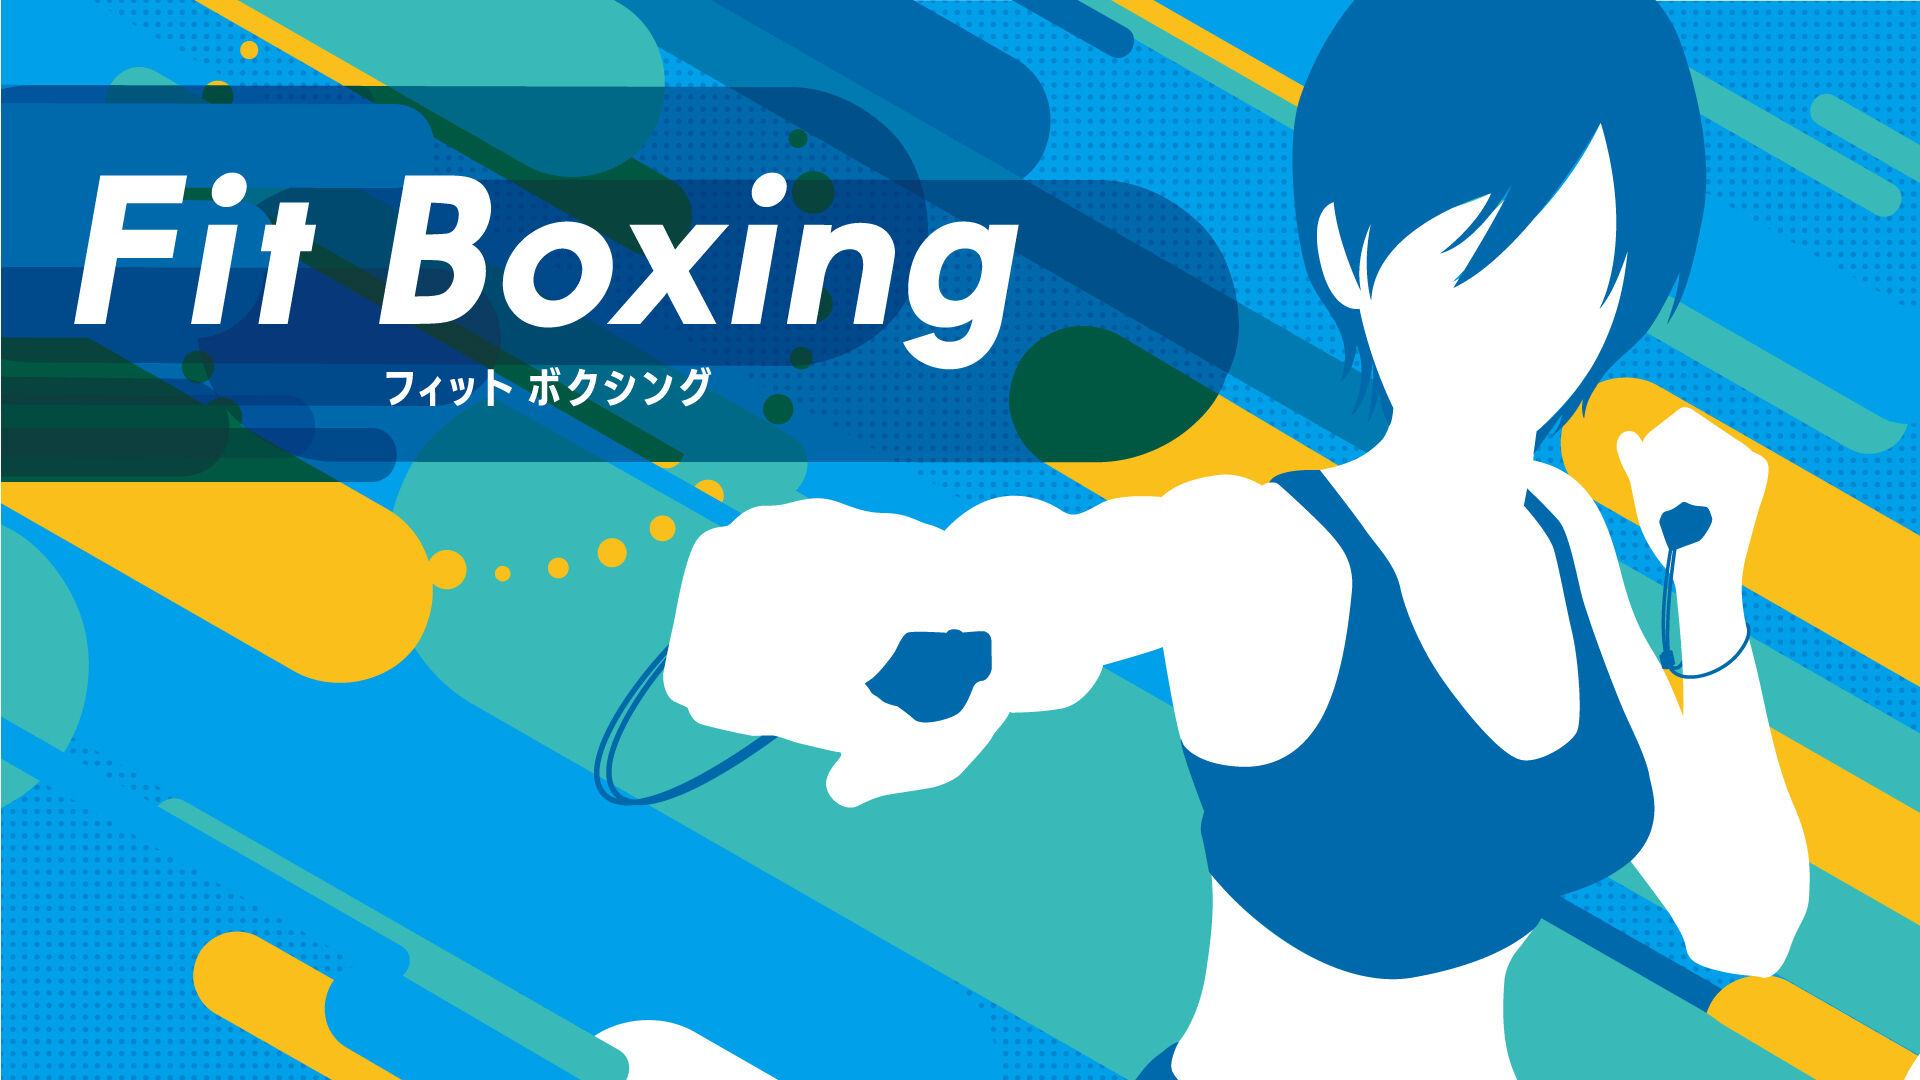 Fit Boxing　フィットボクシング　Switch